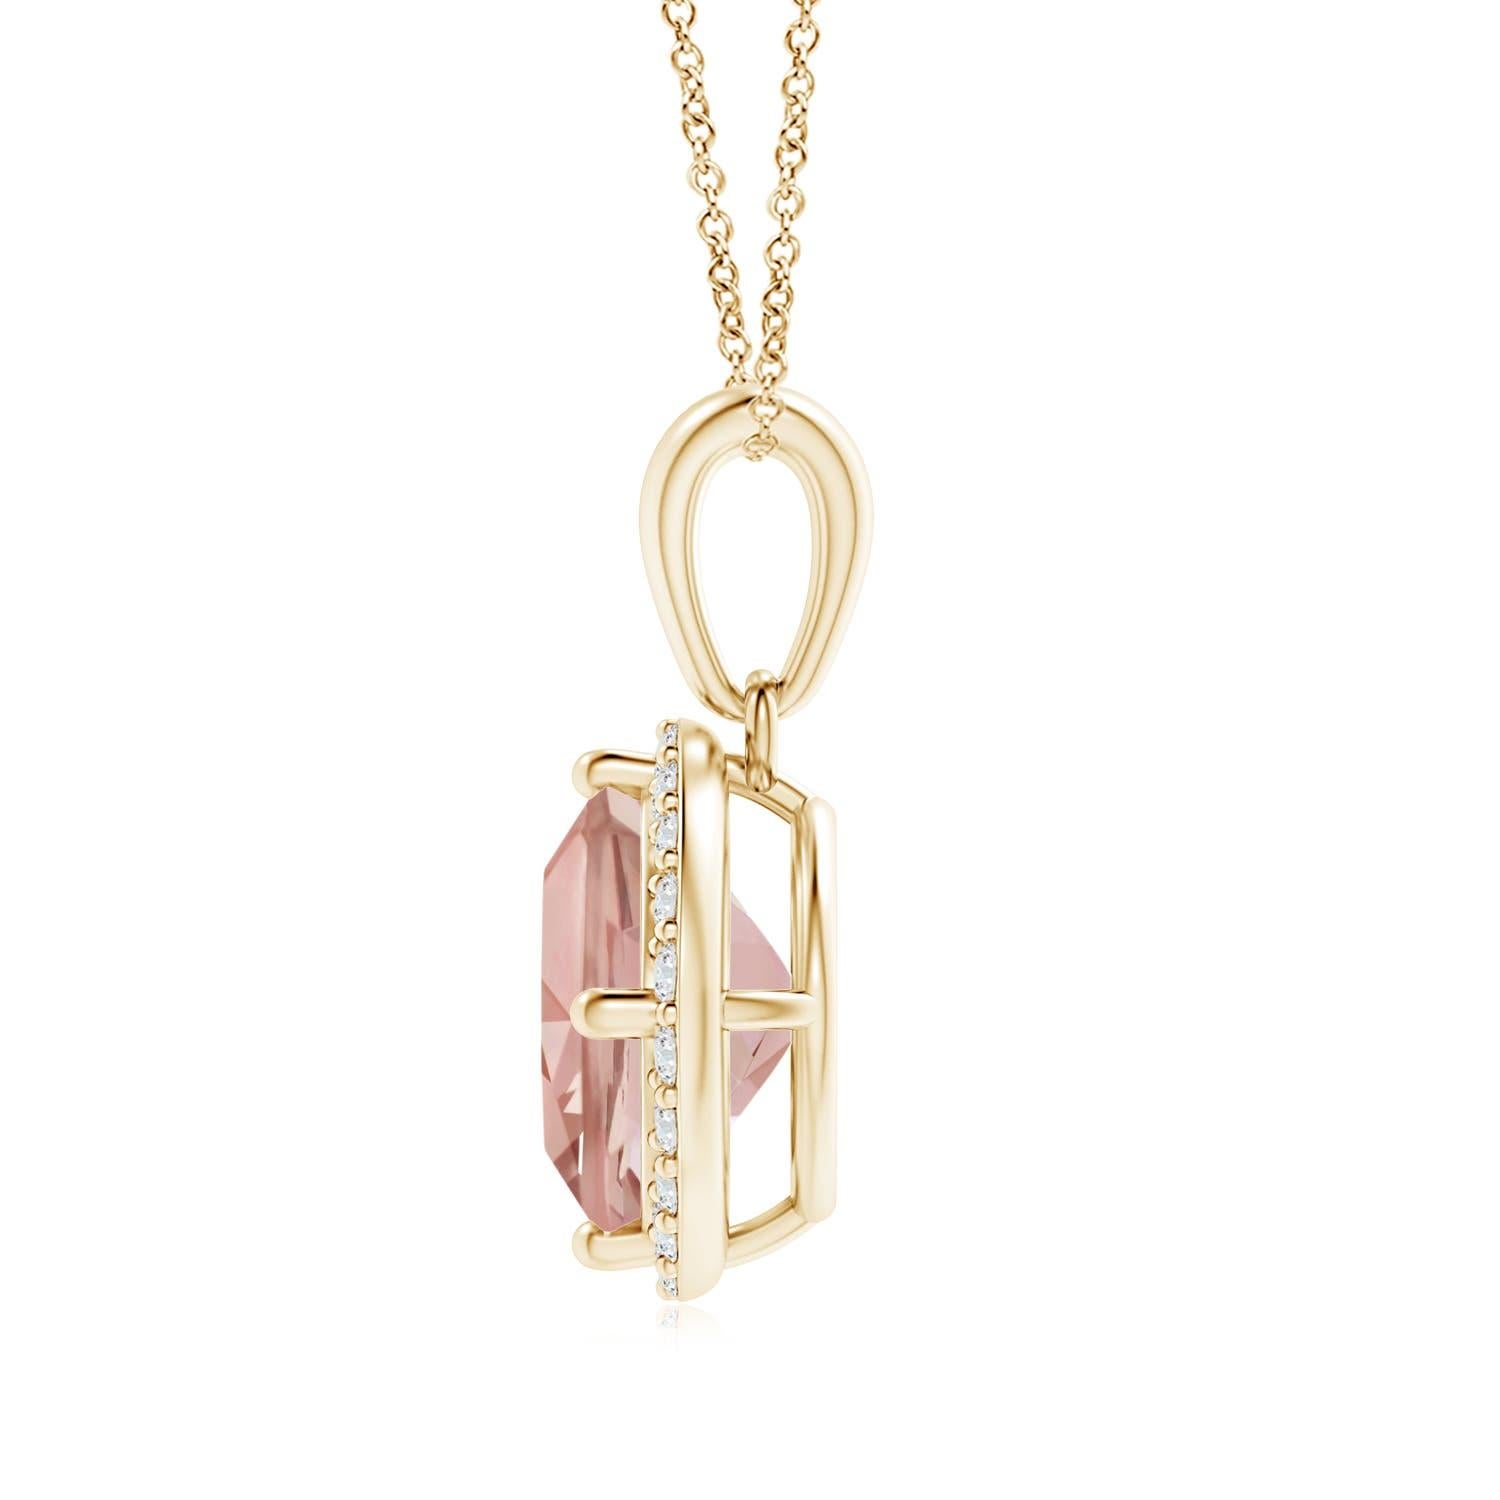 Hanging from a plain lustrous bale, this morganite and diamond halo pendant in 14k yellow gold exudes a distinctive appeal. The cushion morganite is secured sideways in a claw prong setting and surrounded by a halo of diamond accents.
